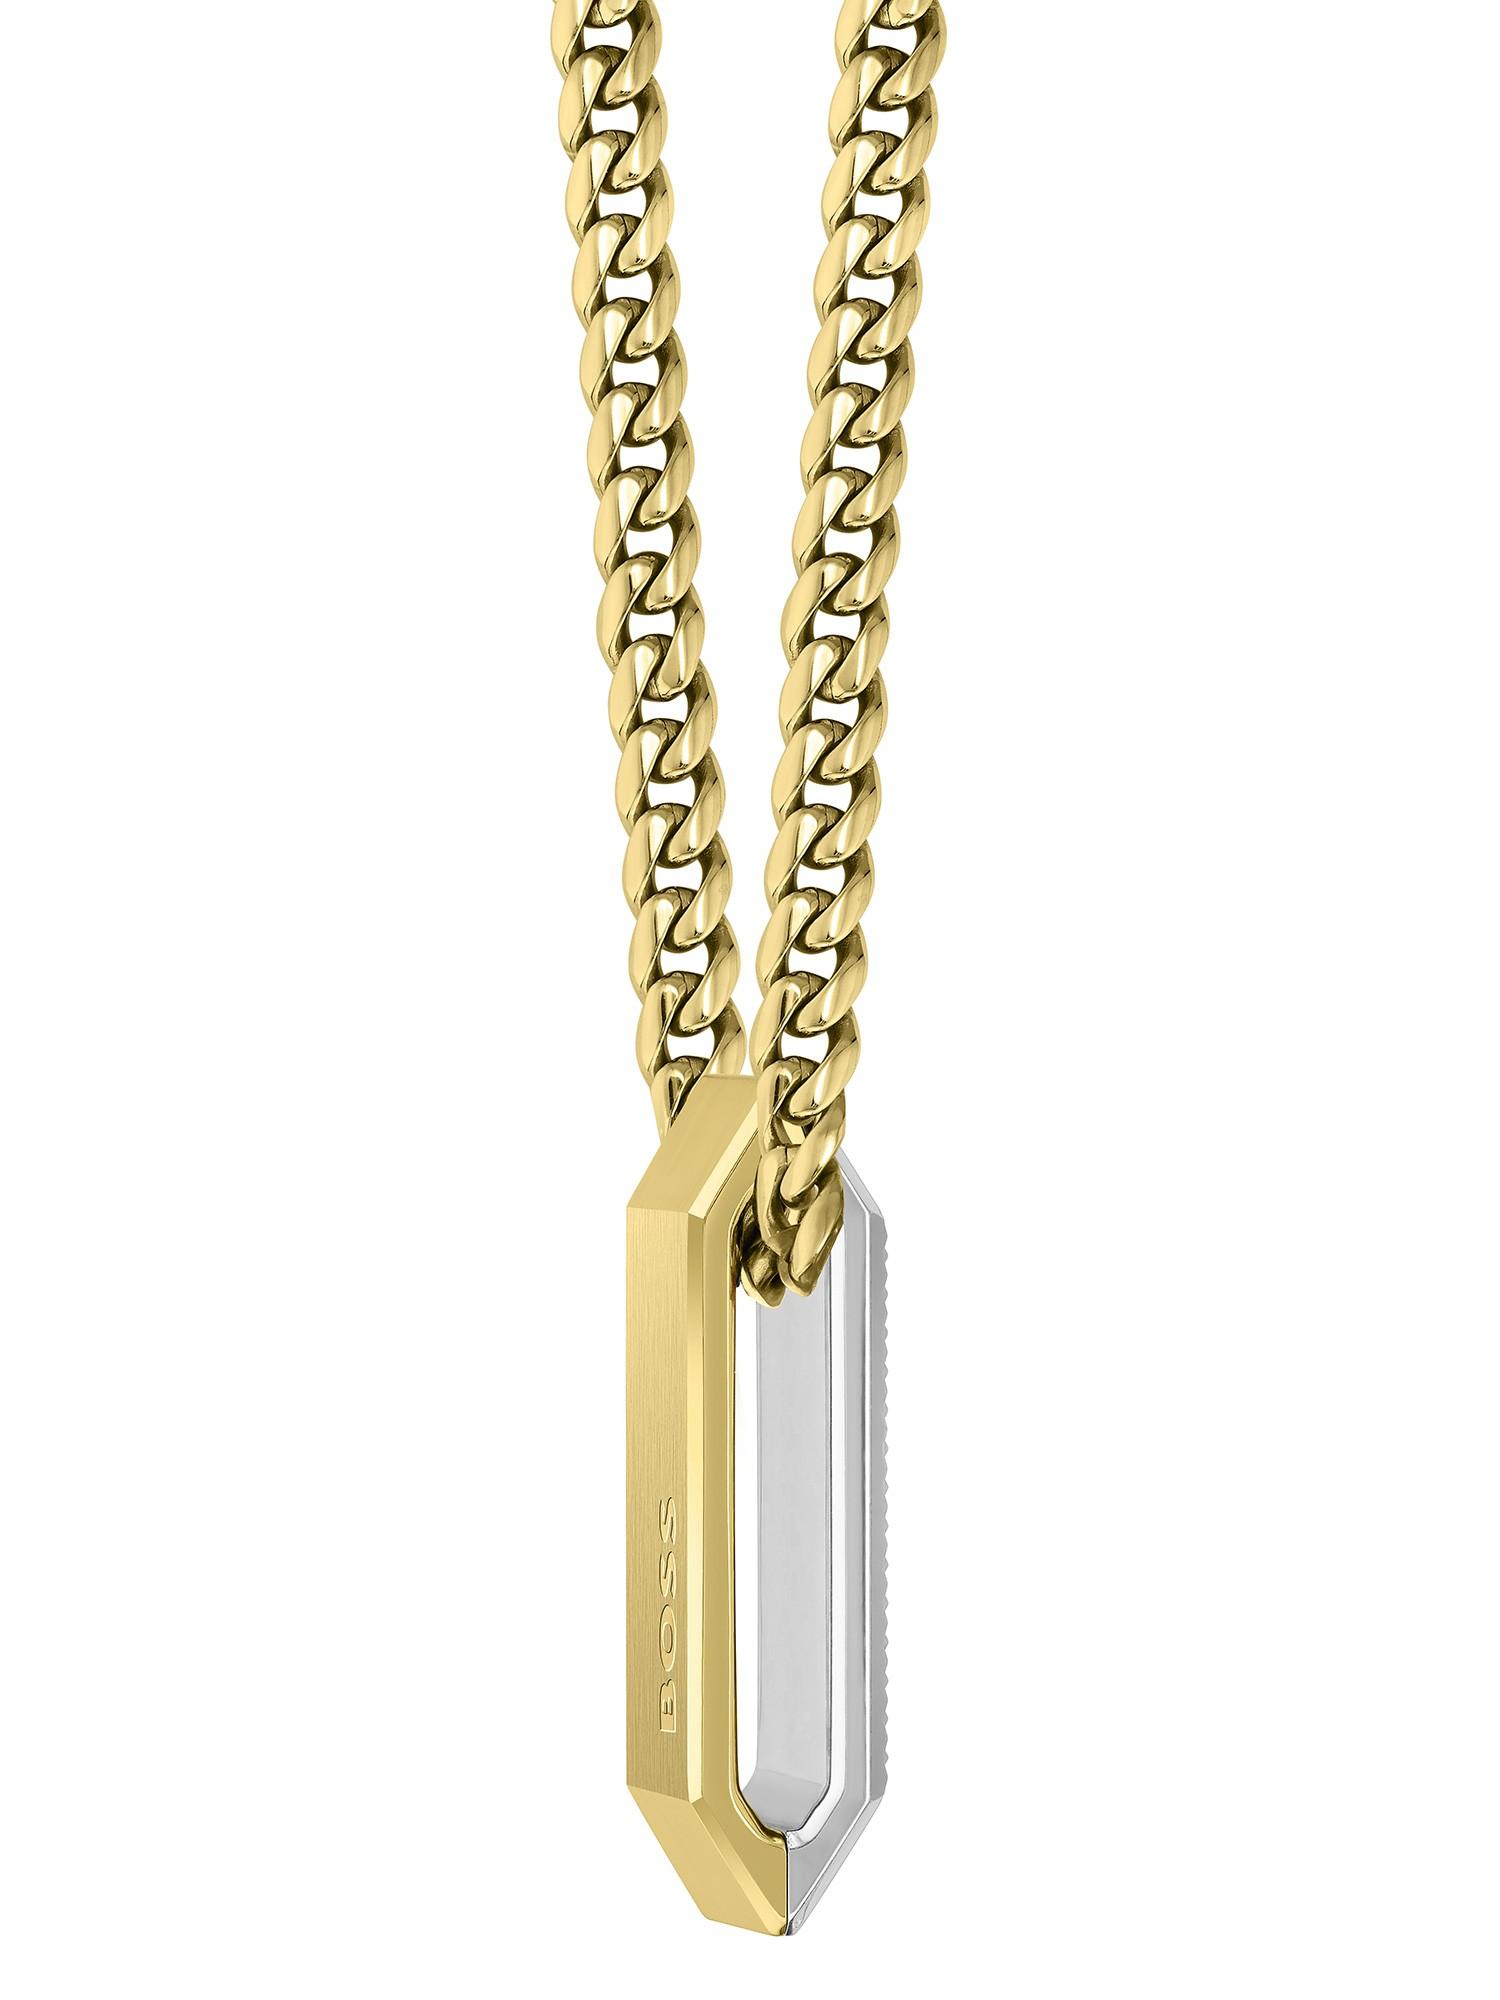 BOSS Hailey Ladies' Stainless Steel Chain Necklace | Ernest Jones